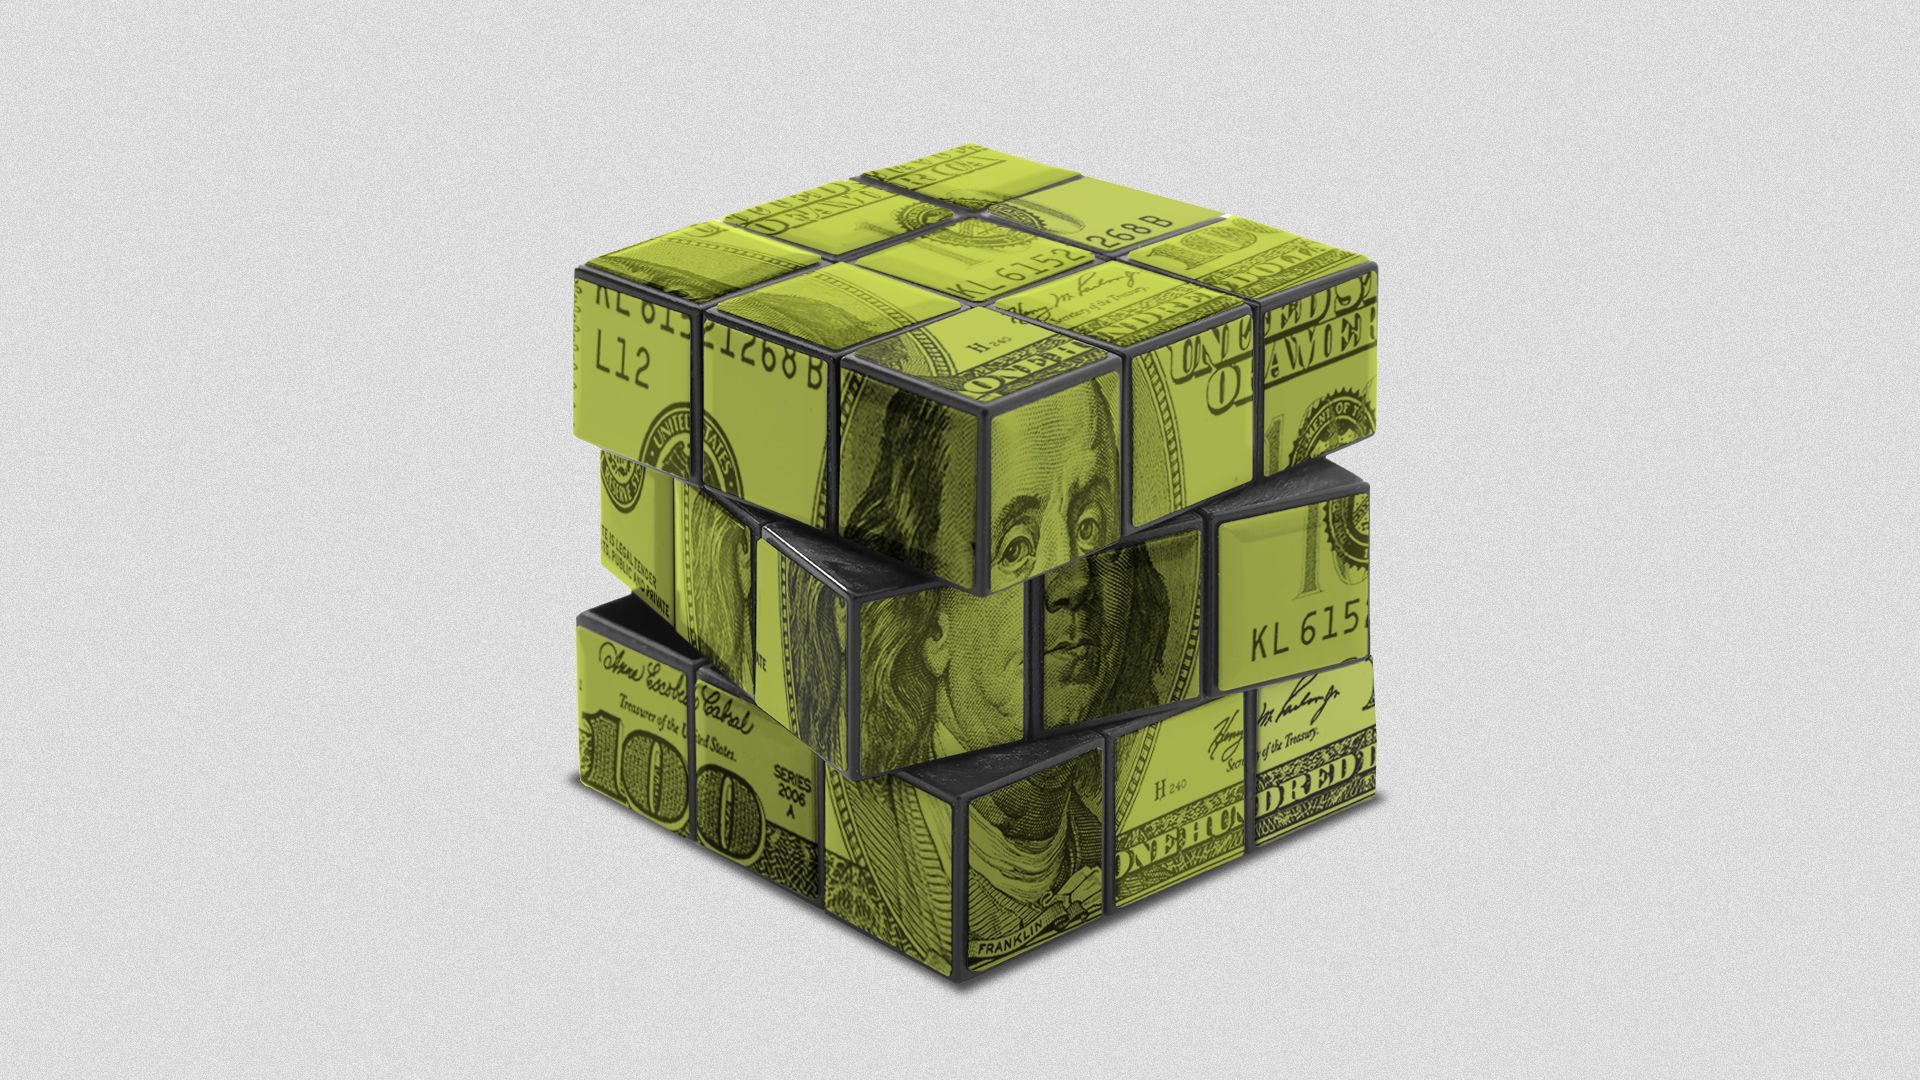 Illustration of a Rubik's cube made of money.